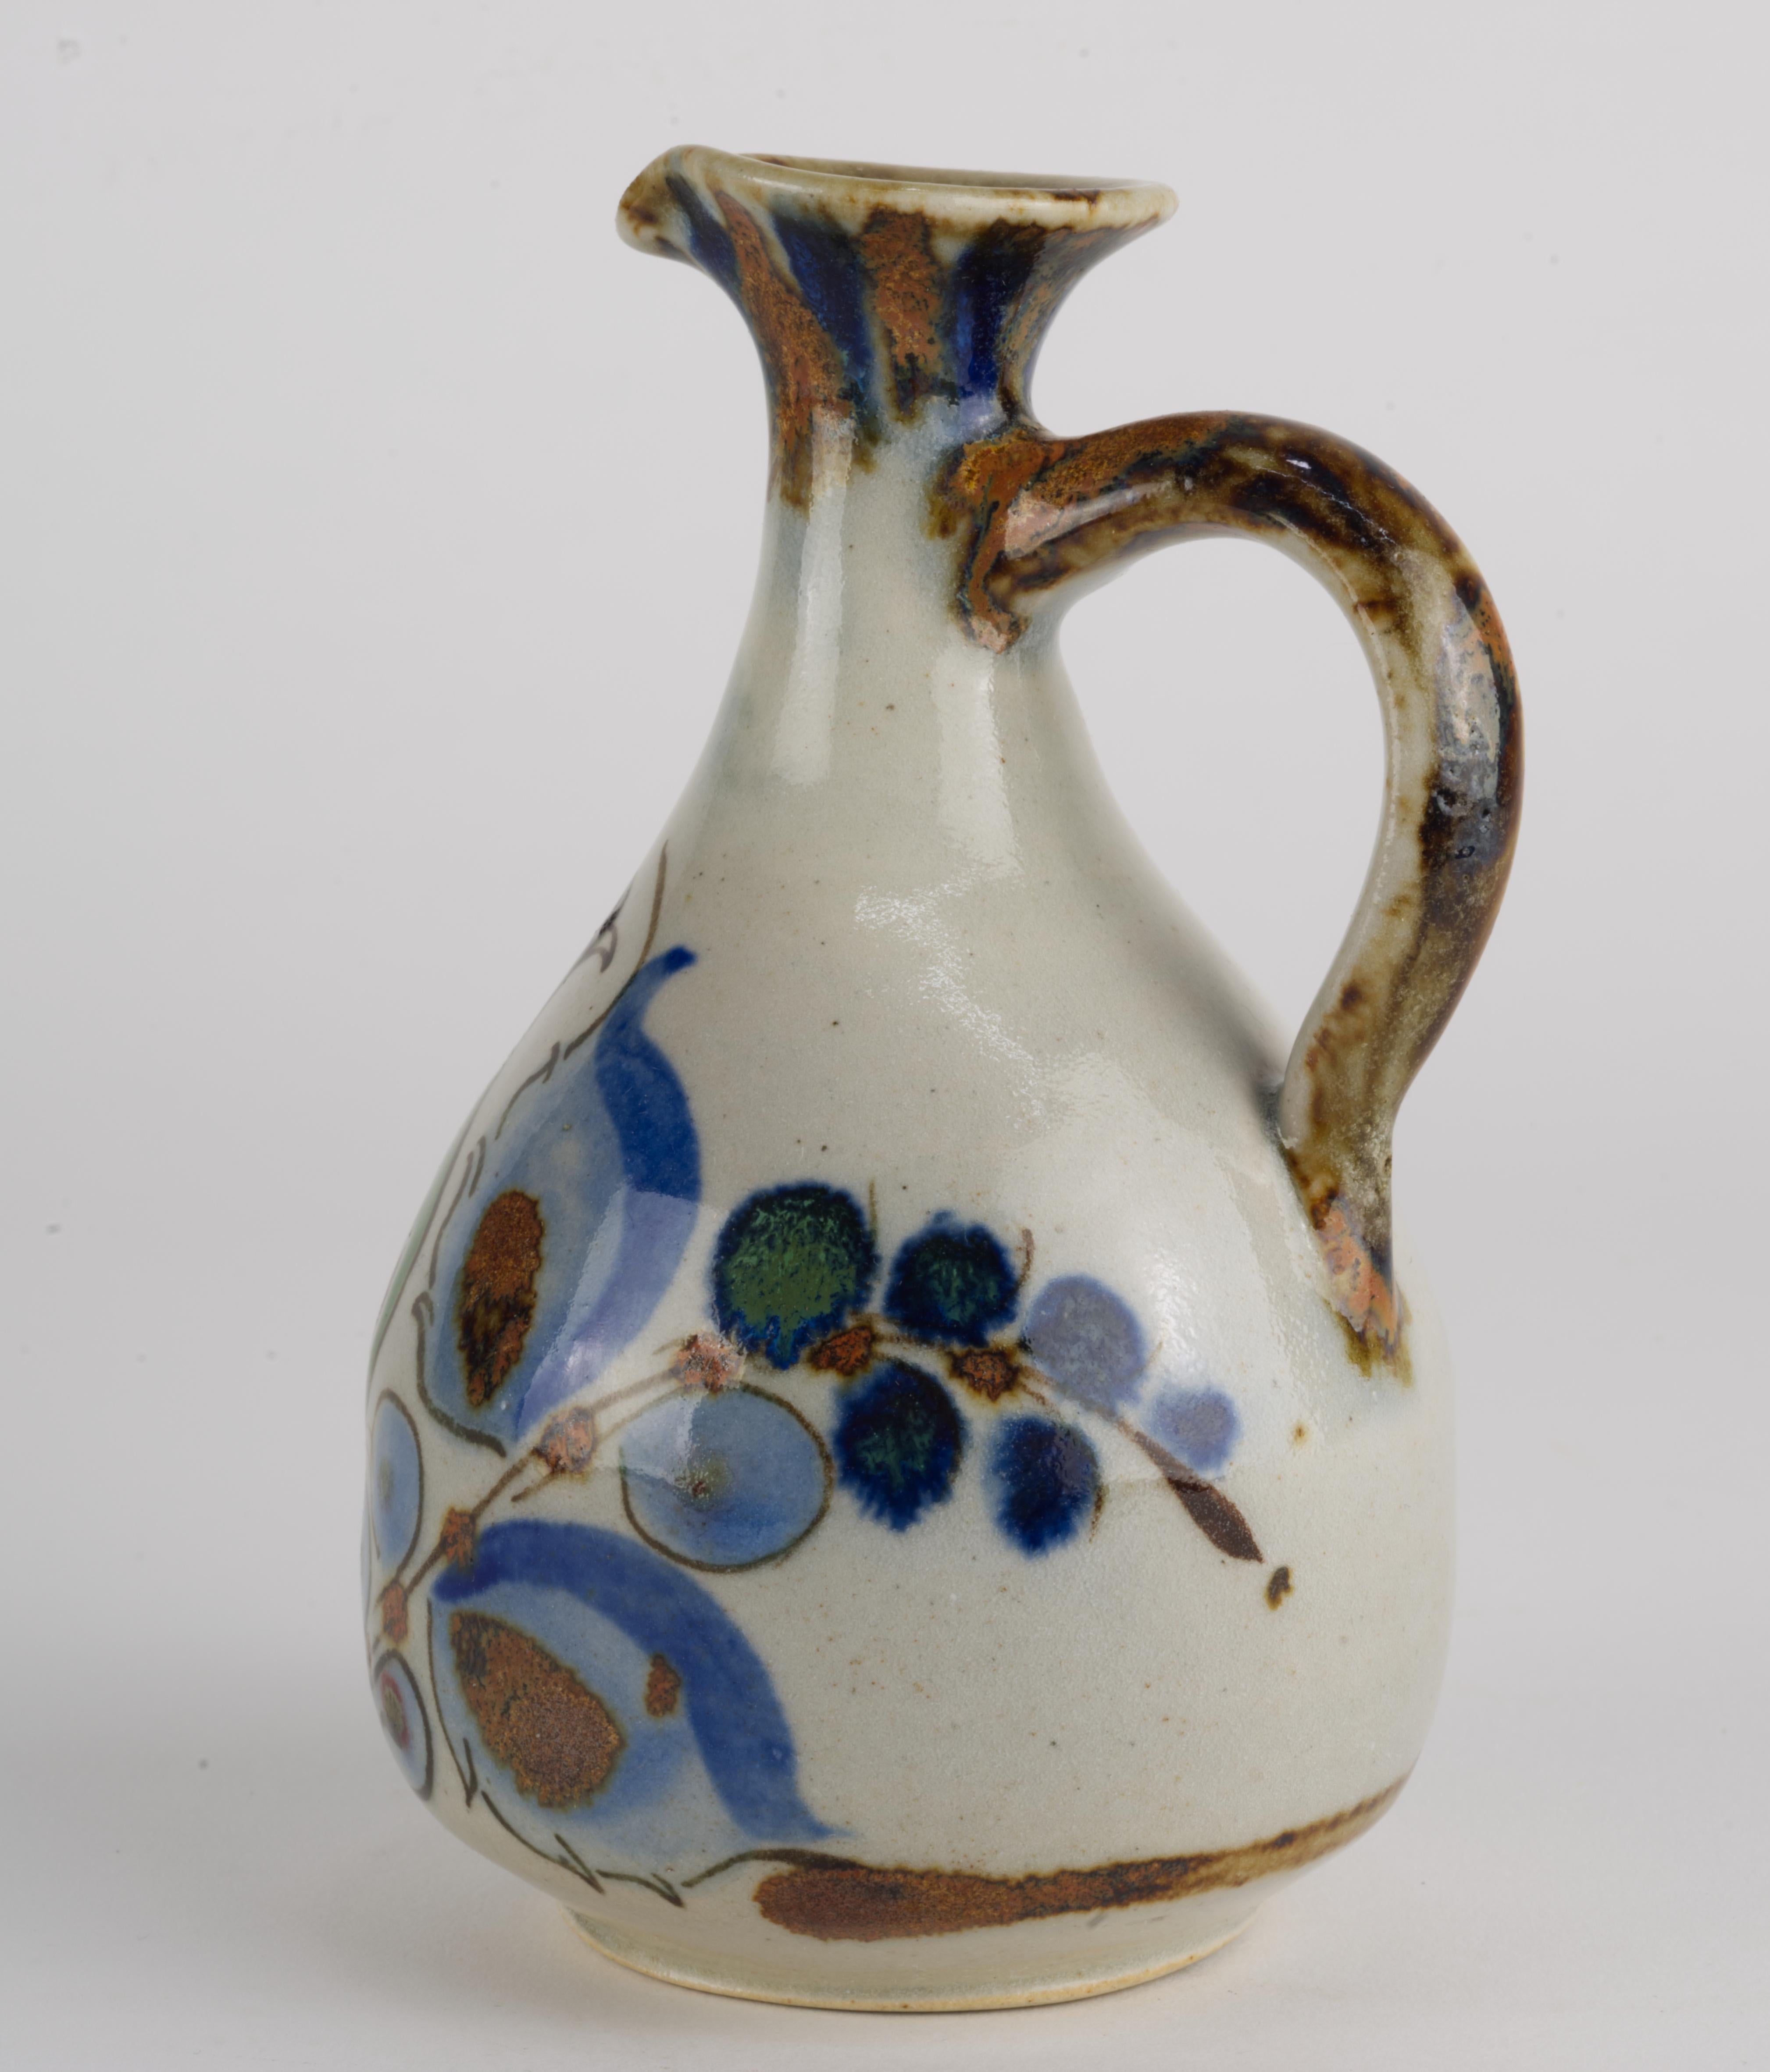  Vintage ceramic bud vase in shape of ewer was hand made by Ken Edwards in traditions of Tonala pottery. It is decorated with bird and abstract flowers design in blue, green, and brown palette on soft grey background.
